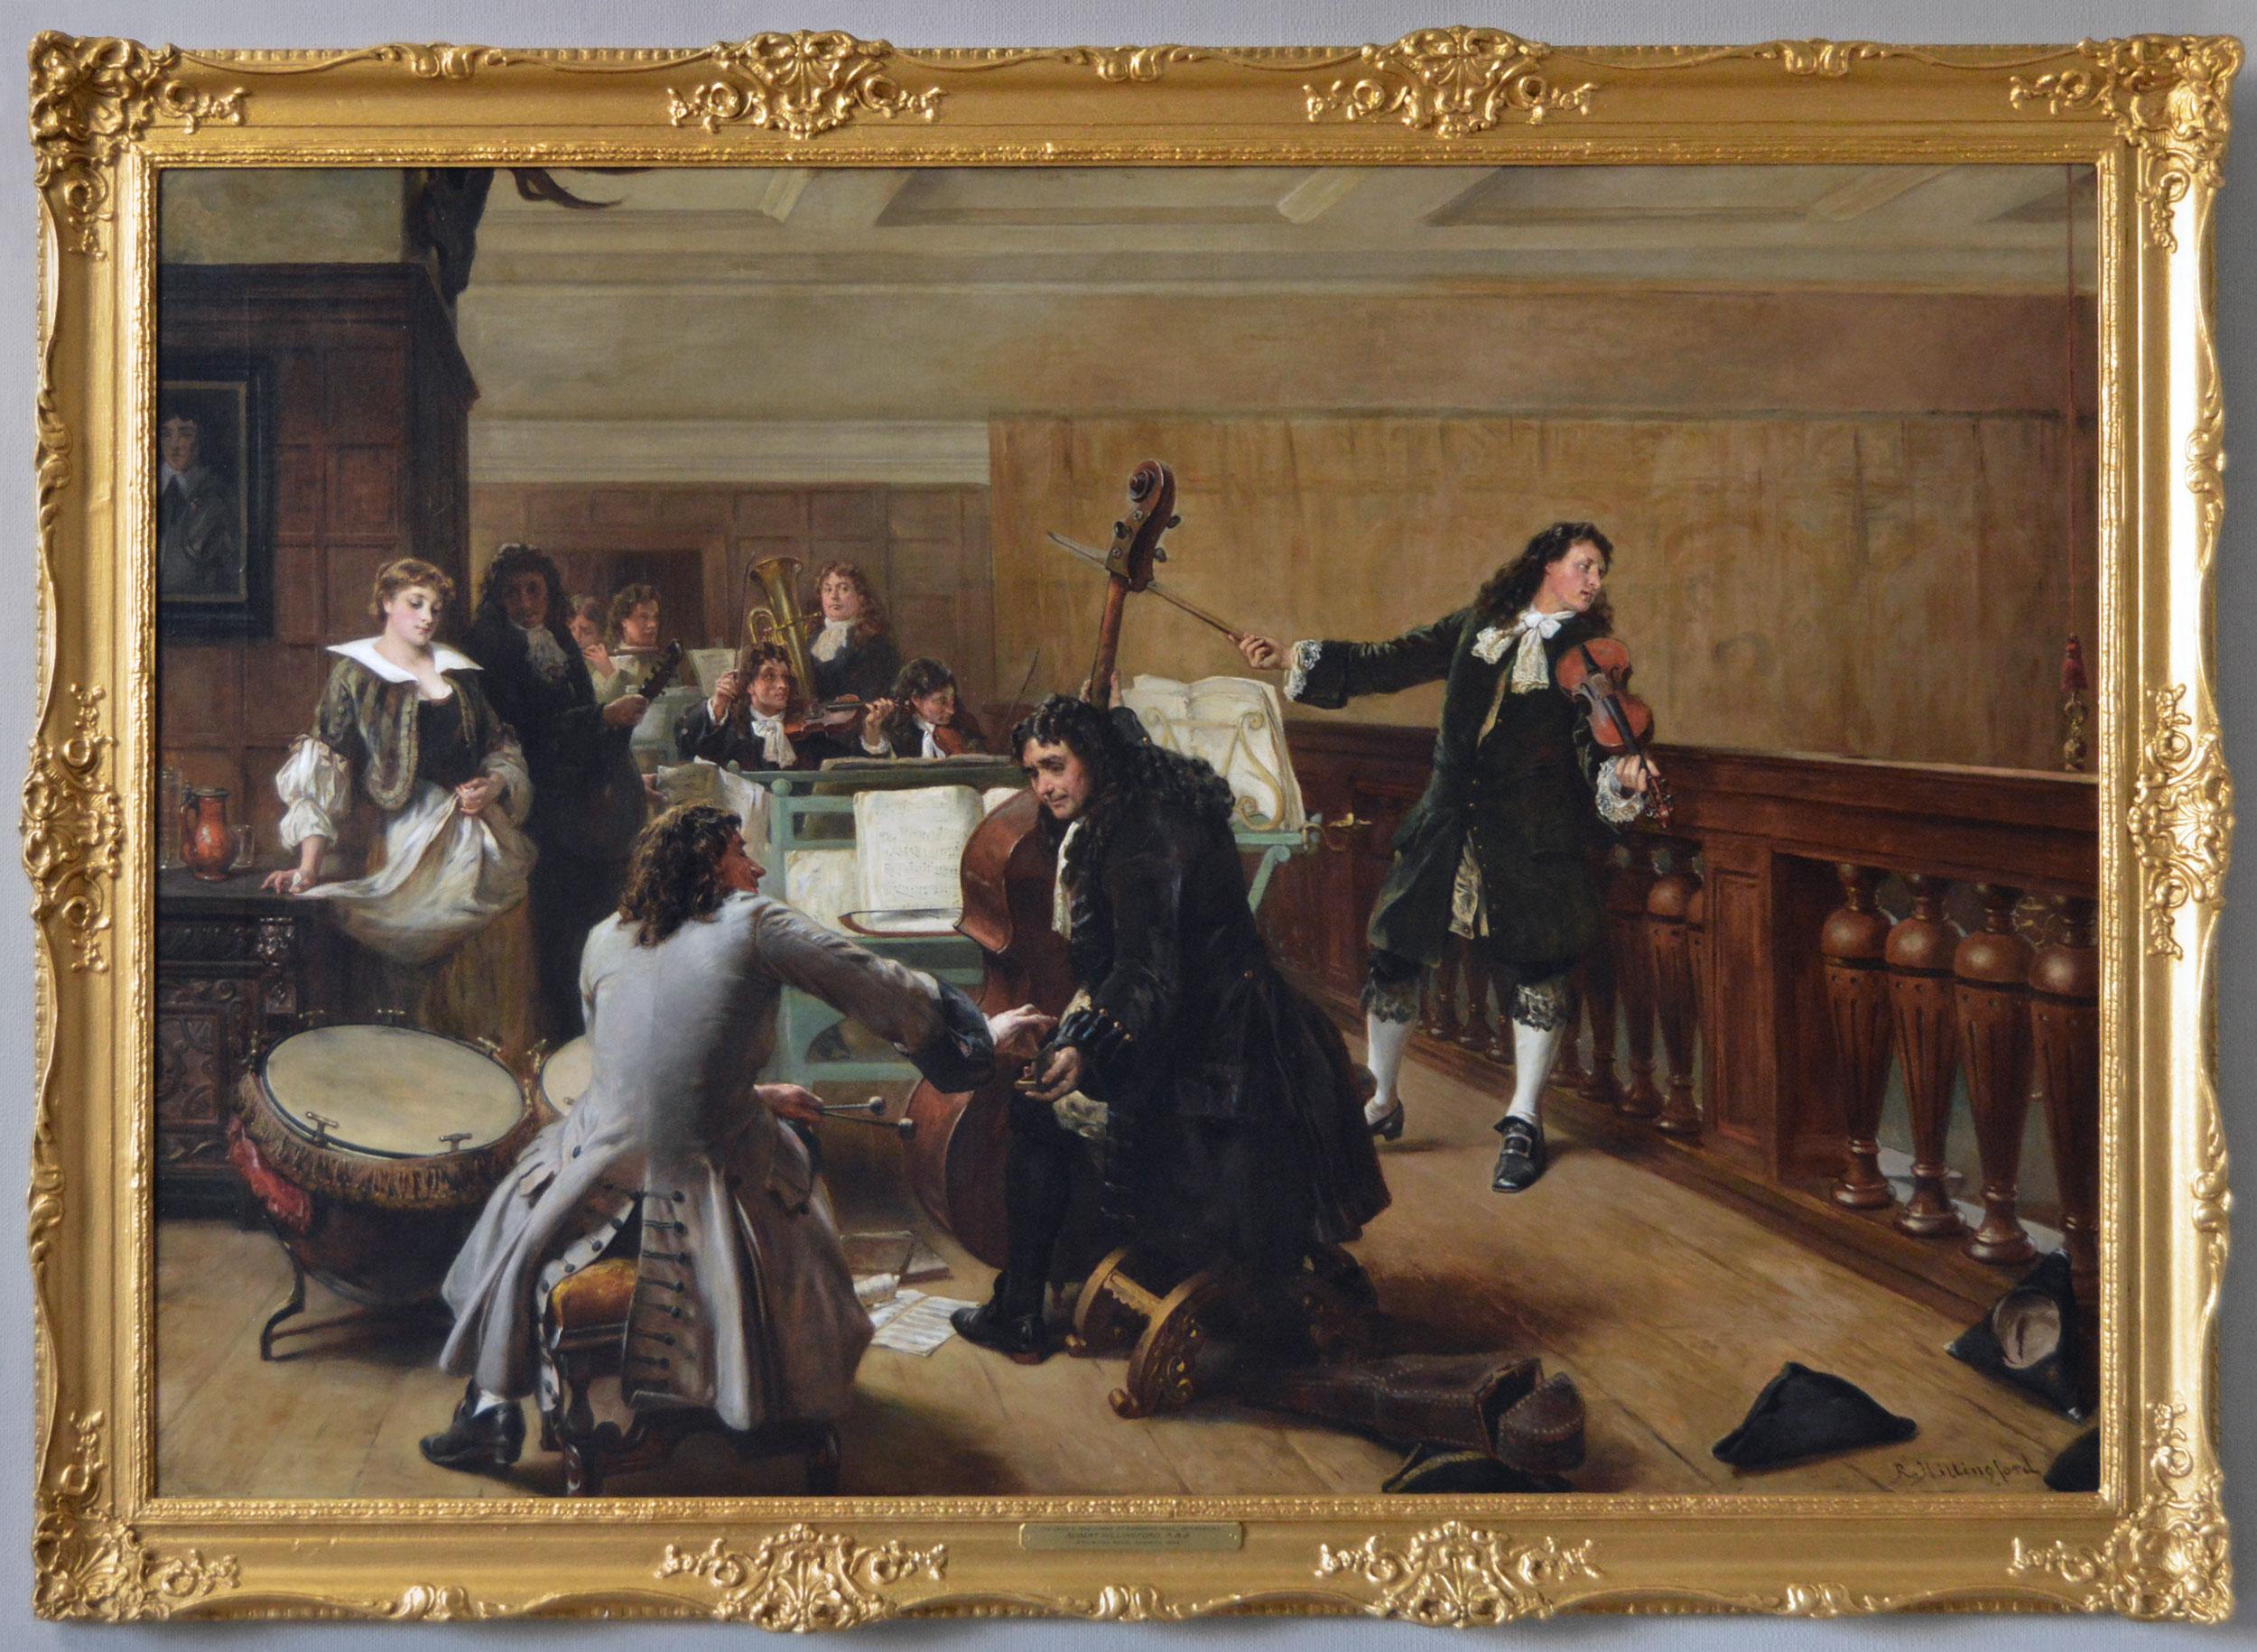 Robert Alexander Hillingford Large scale 19th Century historical genre  oil painting of a group of musicians For Sale at 1stDibs genre scale